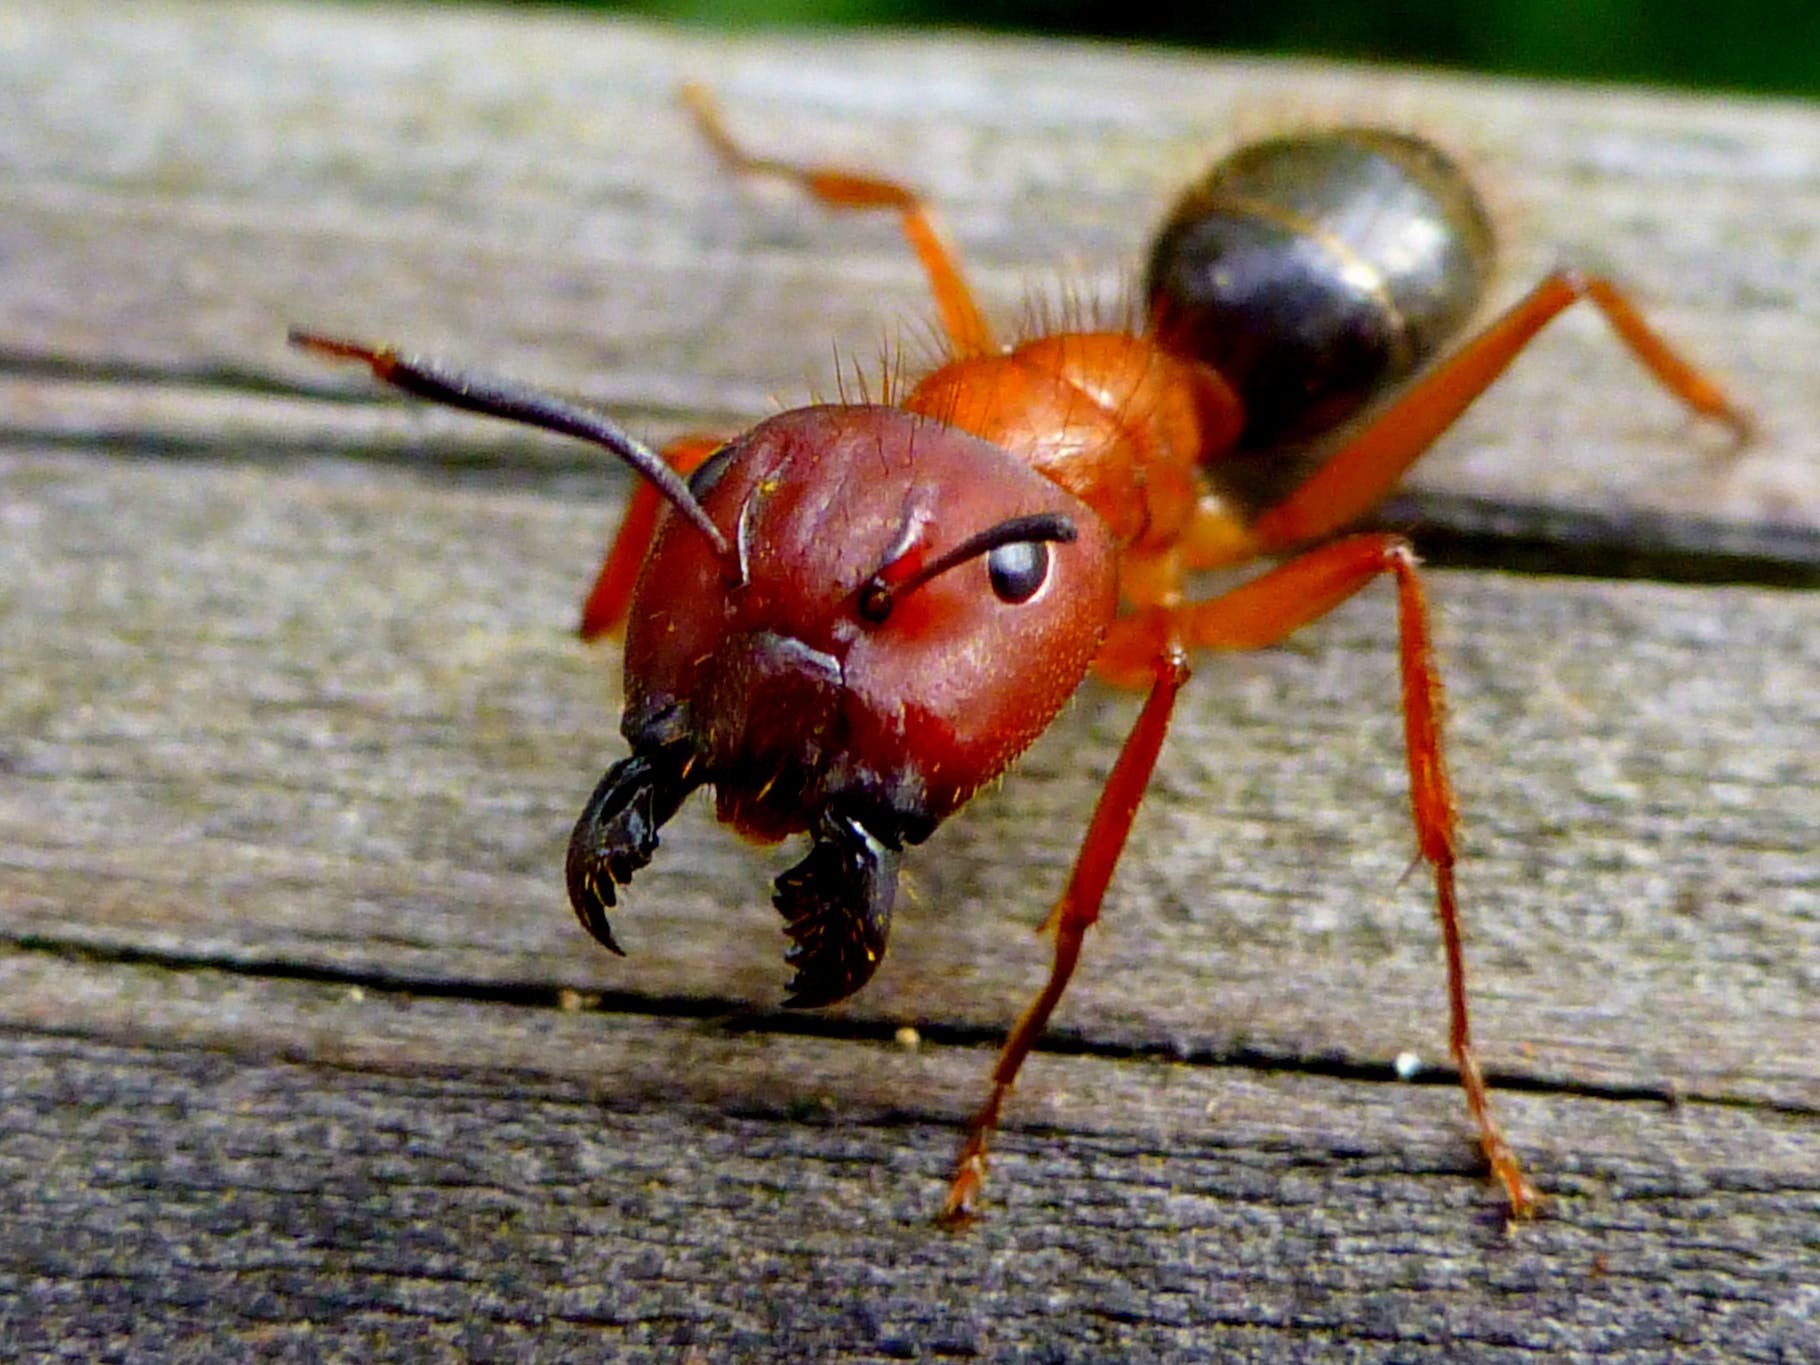 An Entomologist's Scientific Review of 'Ant-Man' | Inverse